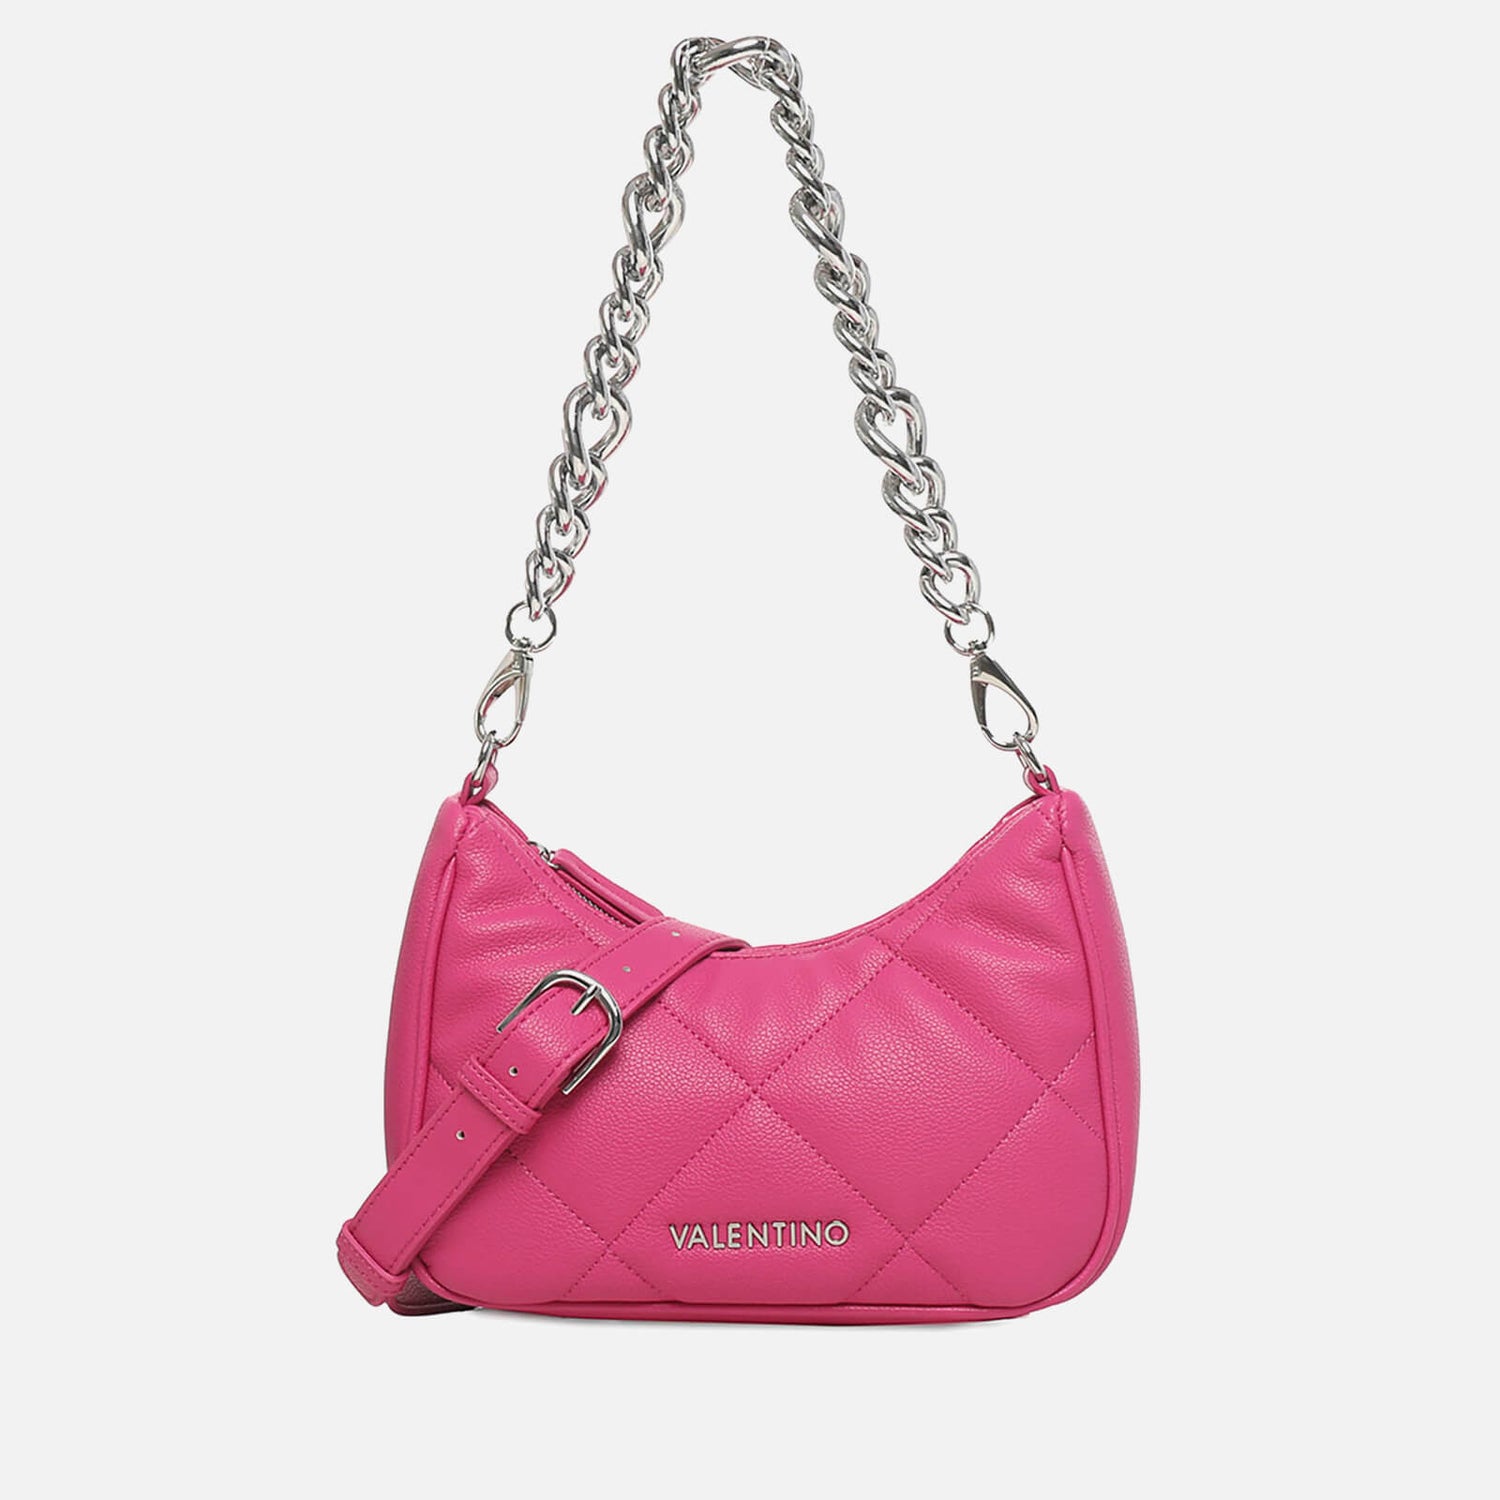 Valentino Bags Cold Re Faux Leather Shoulder Bag